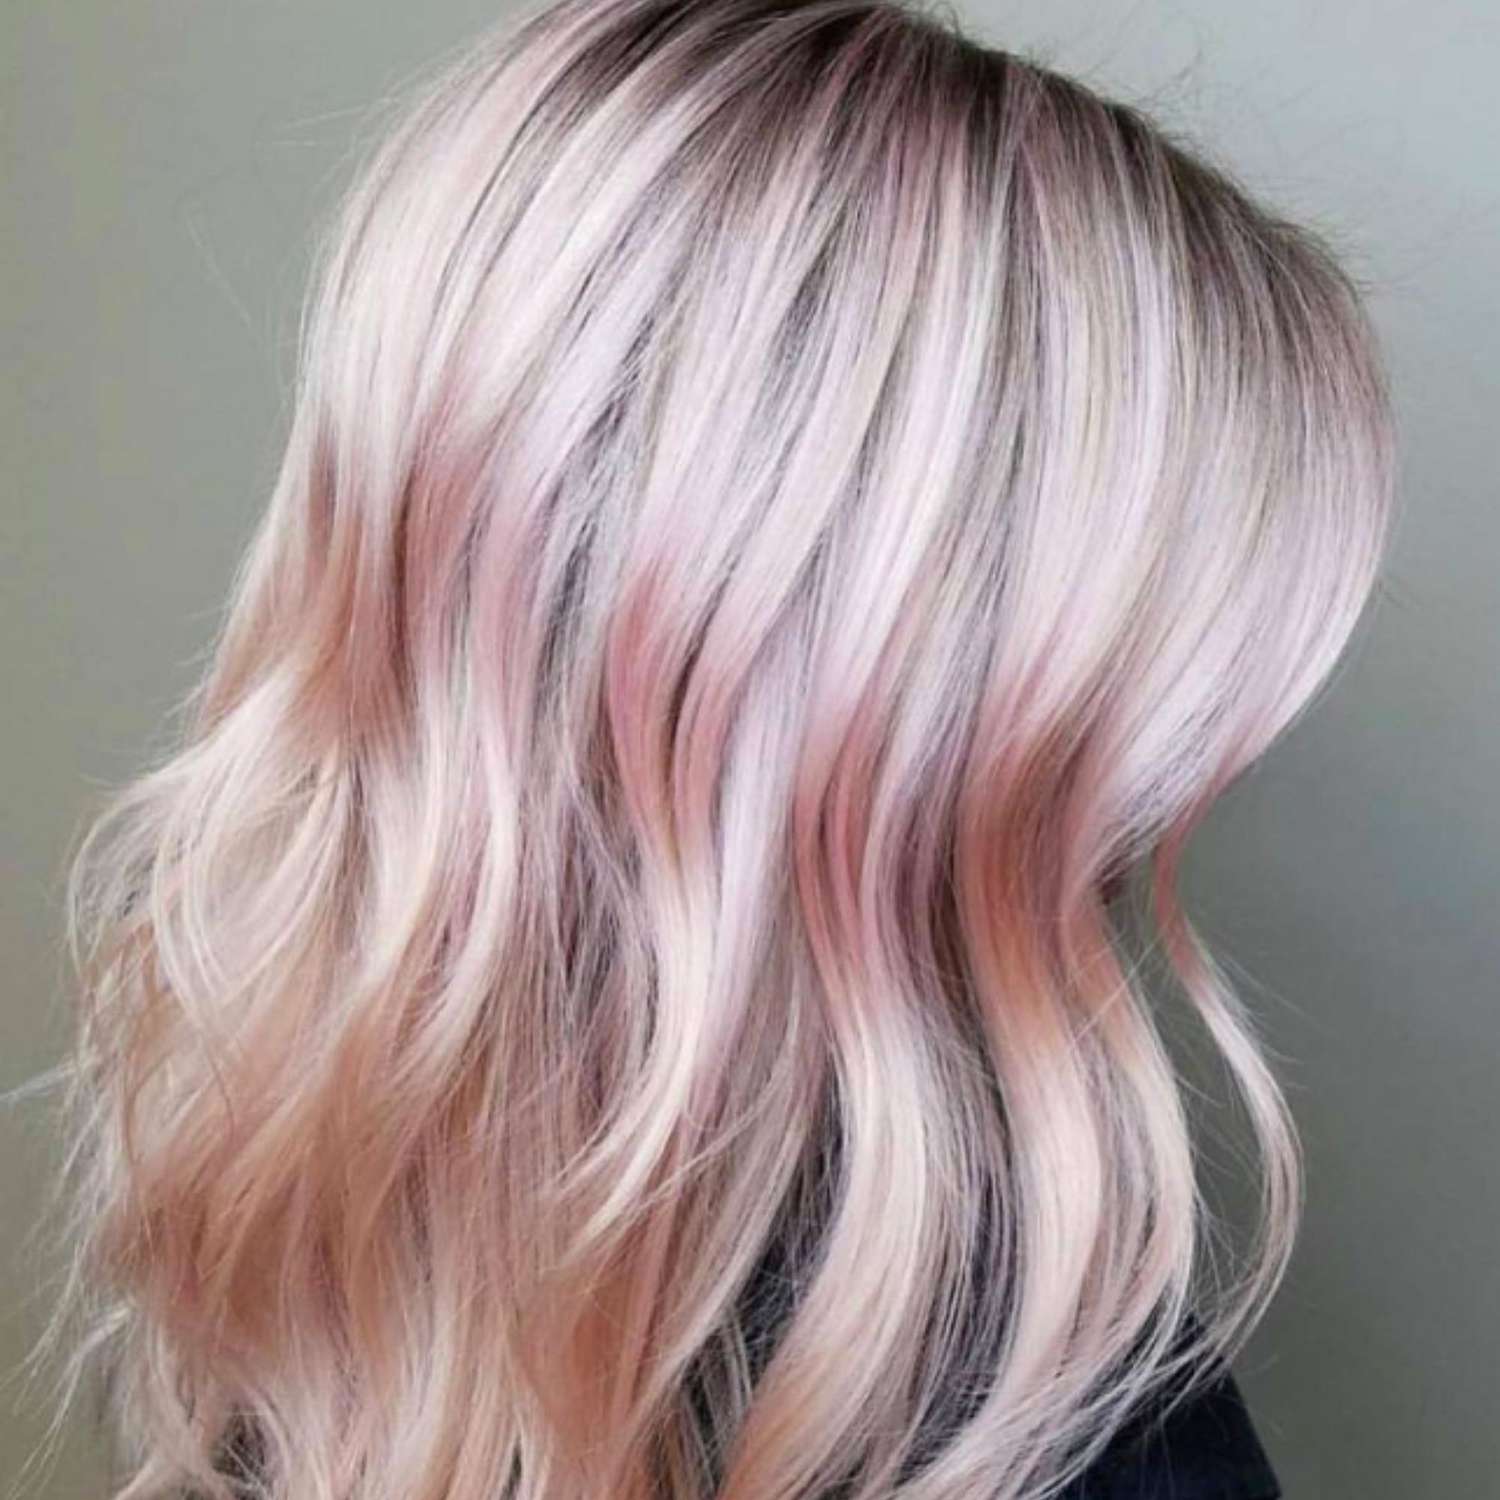 Baby pink highlights on blonde hair.